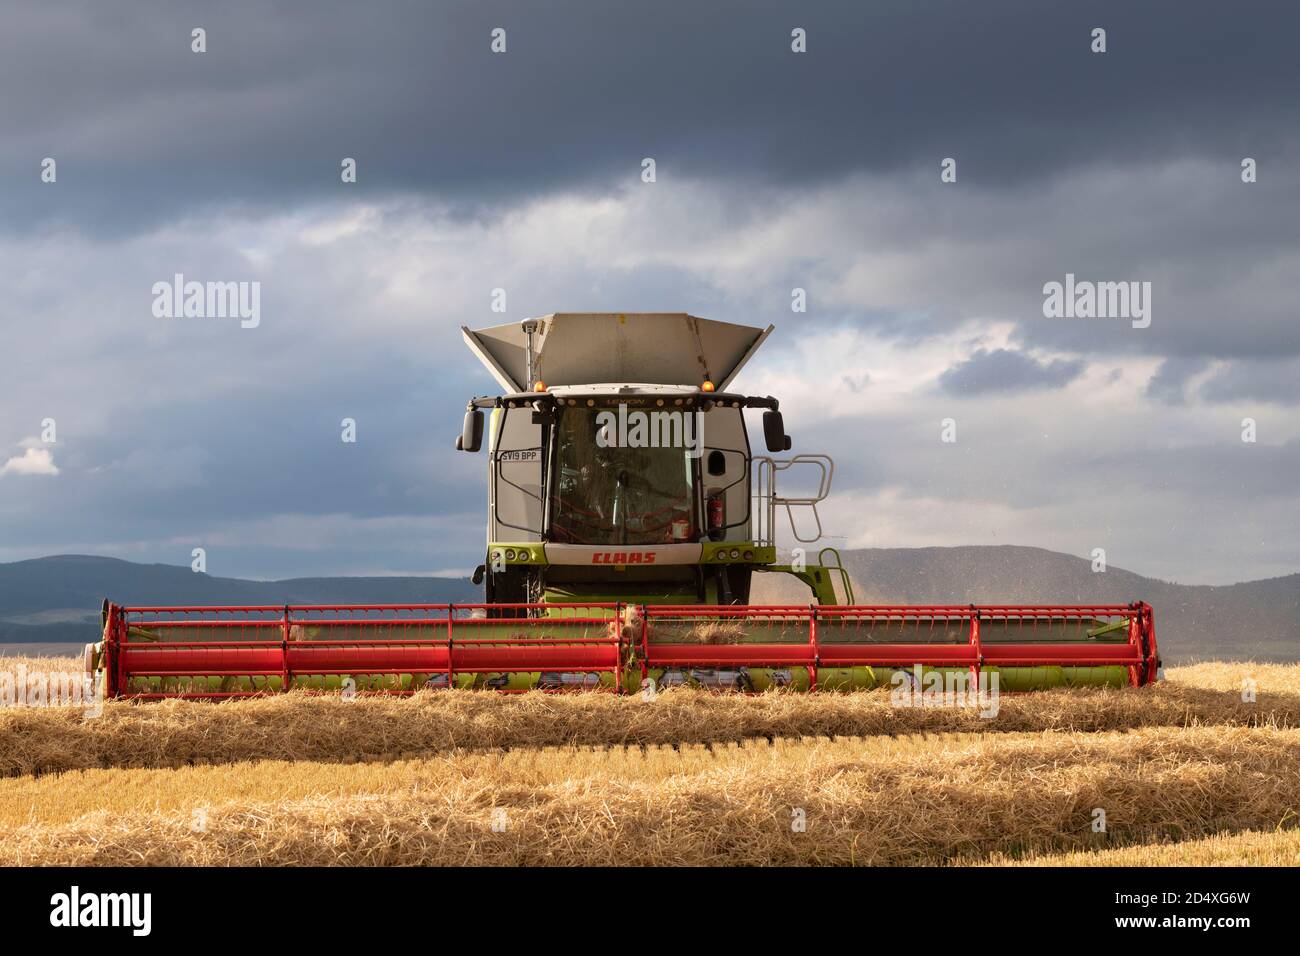 A Head-On View of A Claas Lexion 770 Combine Harvester at Work in a Field of Barley Under a Leaden Sky Stock Photo